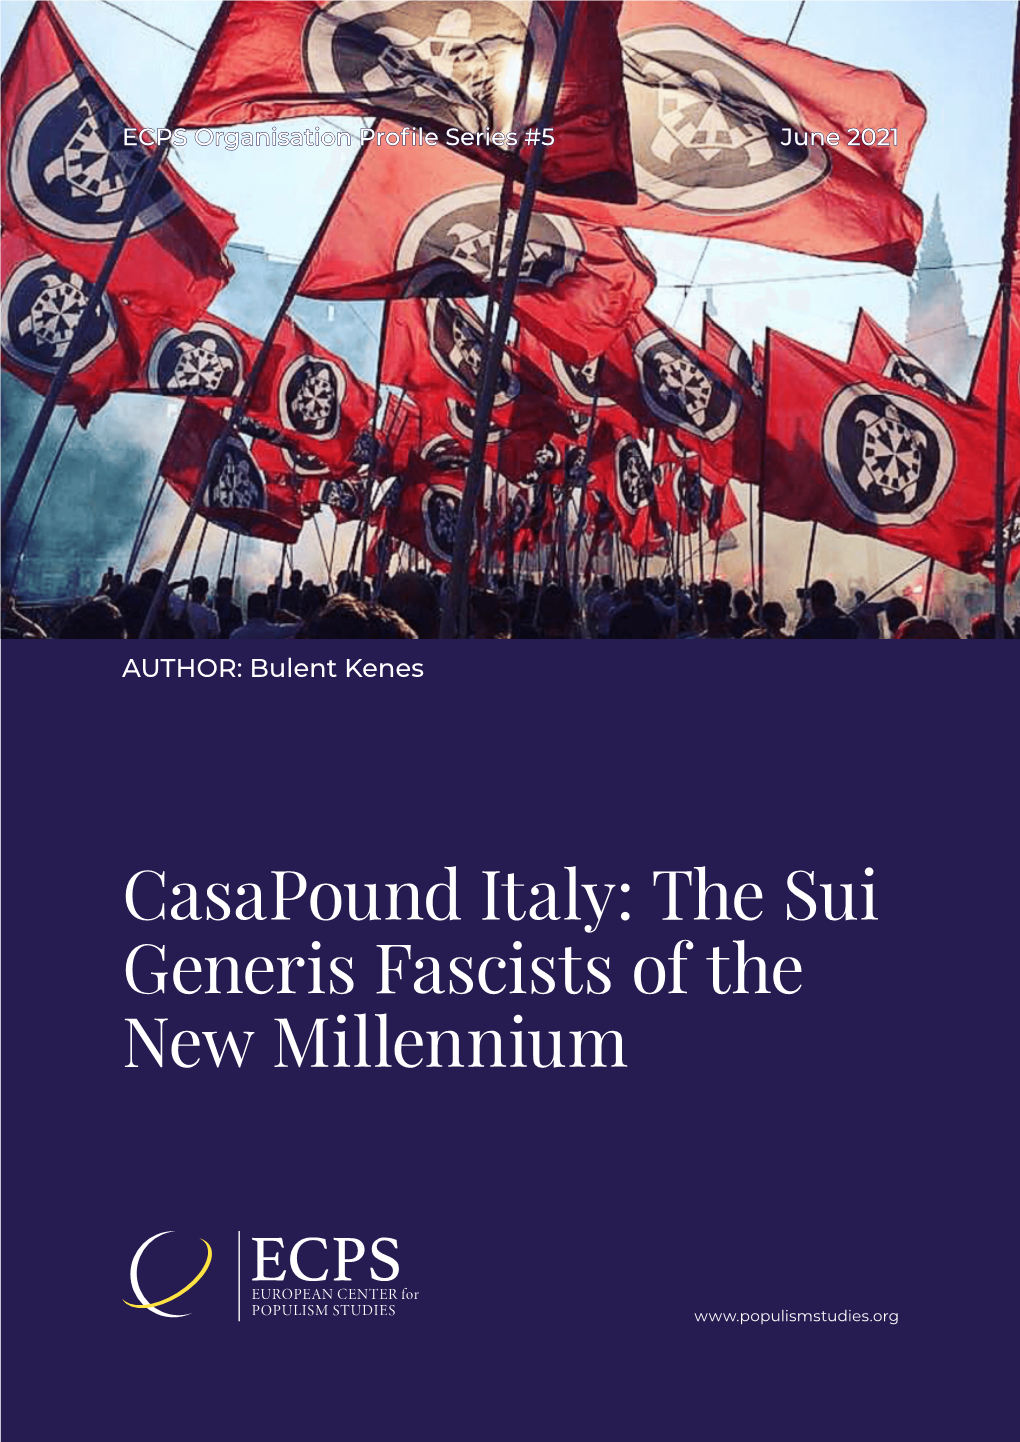 Casapound Italy: the Sui Generis Fascists of the New Millennium